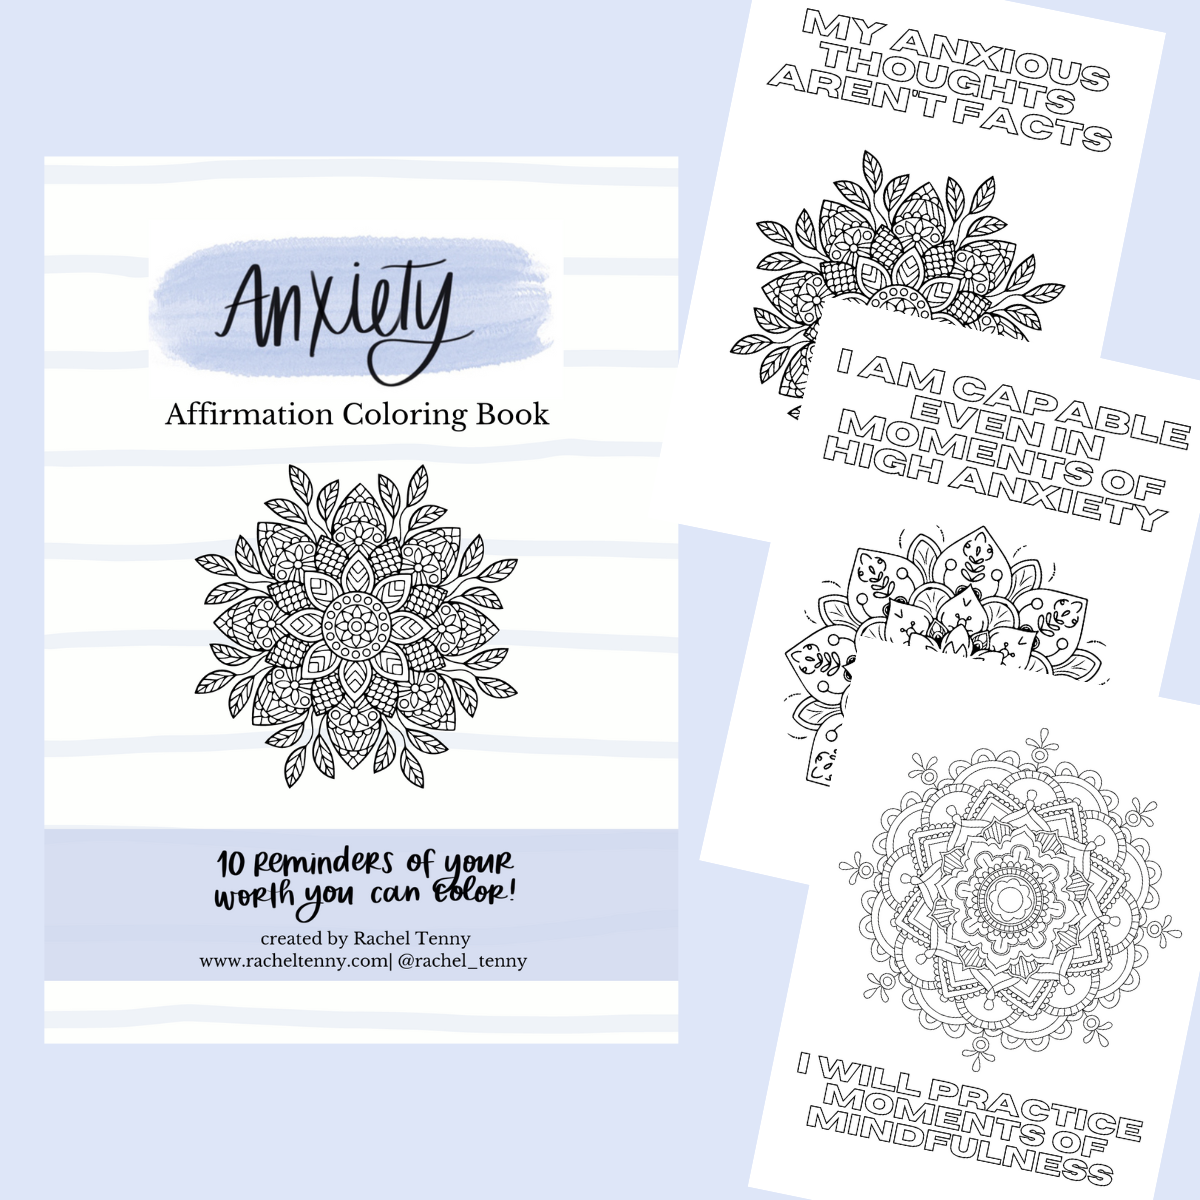 Anxiety Affirmation Coloring Book | Digital Download